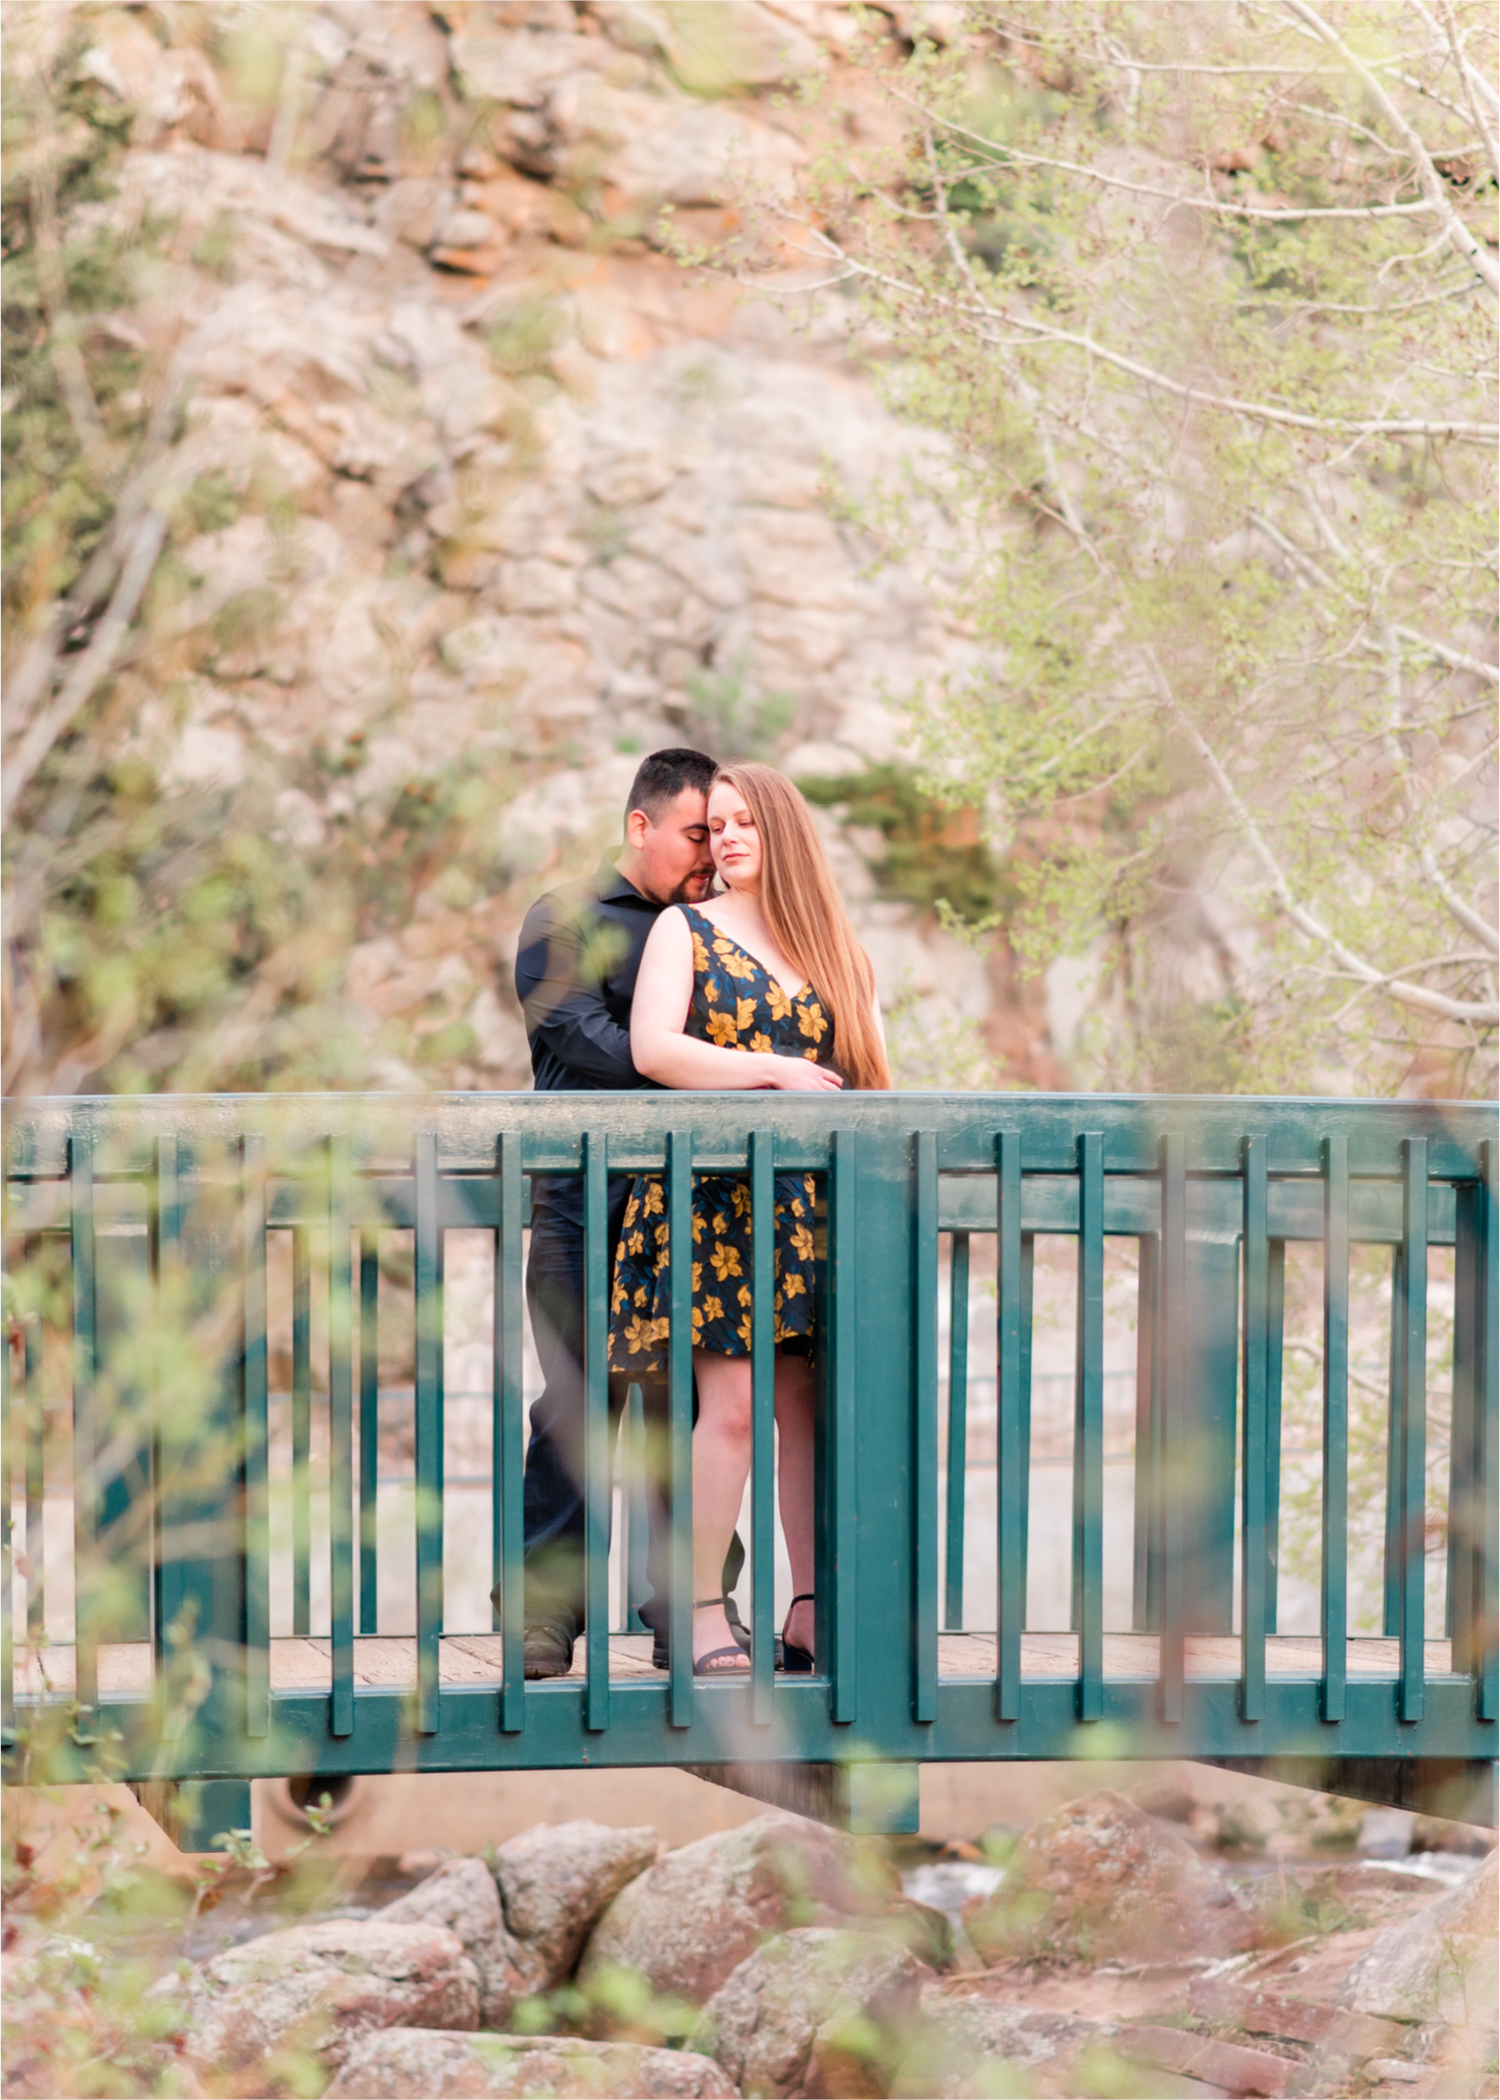 Estes Park Summer Engagement | Britni Girard Photography | Colorado Wedding Photography and Videography Team | Adventures along trails overlooking the mountains, followed by a romantic stroll in downtown Estes Park and Bond Park